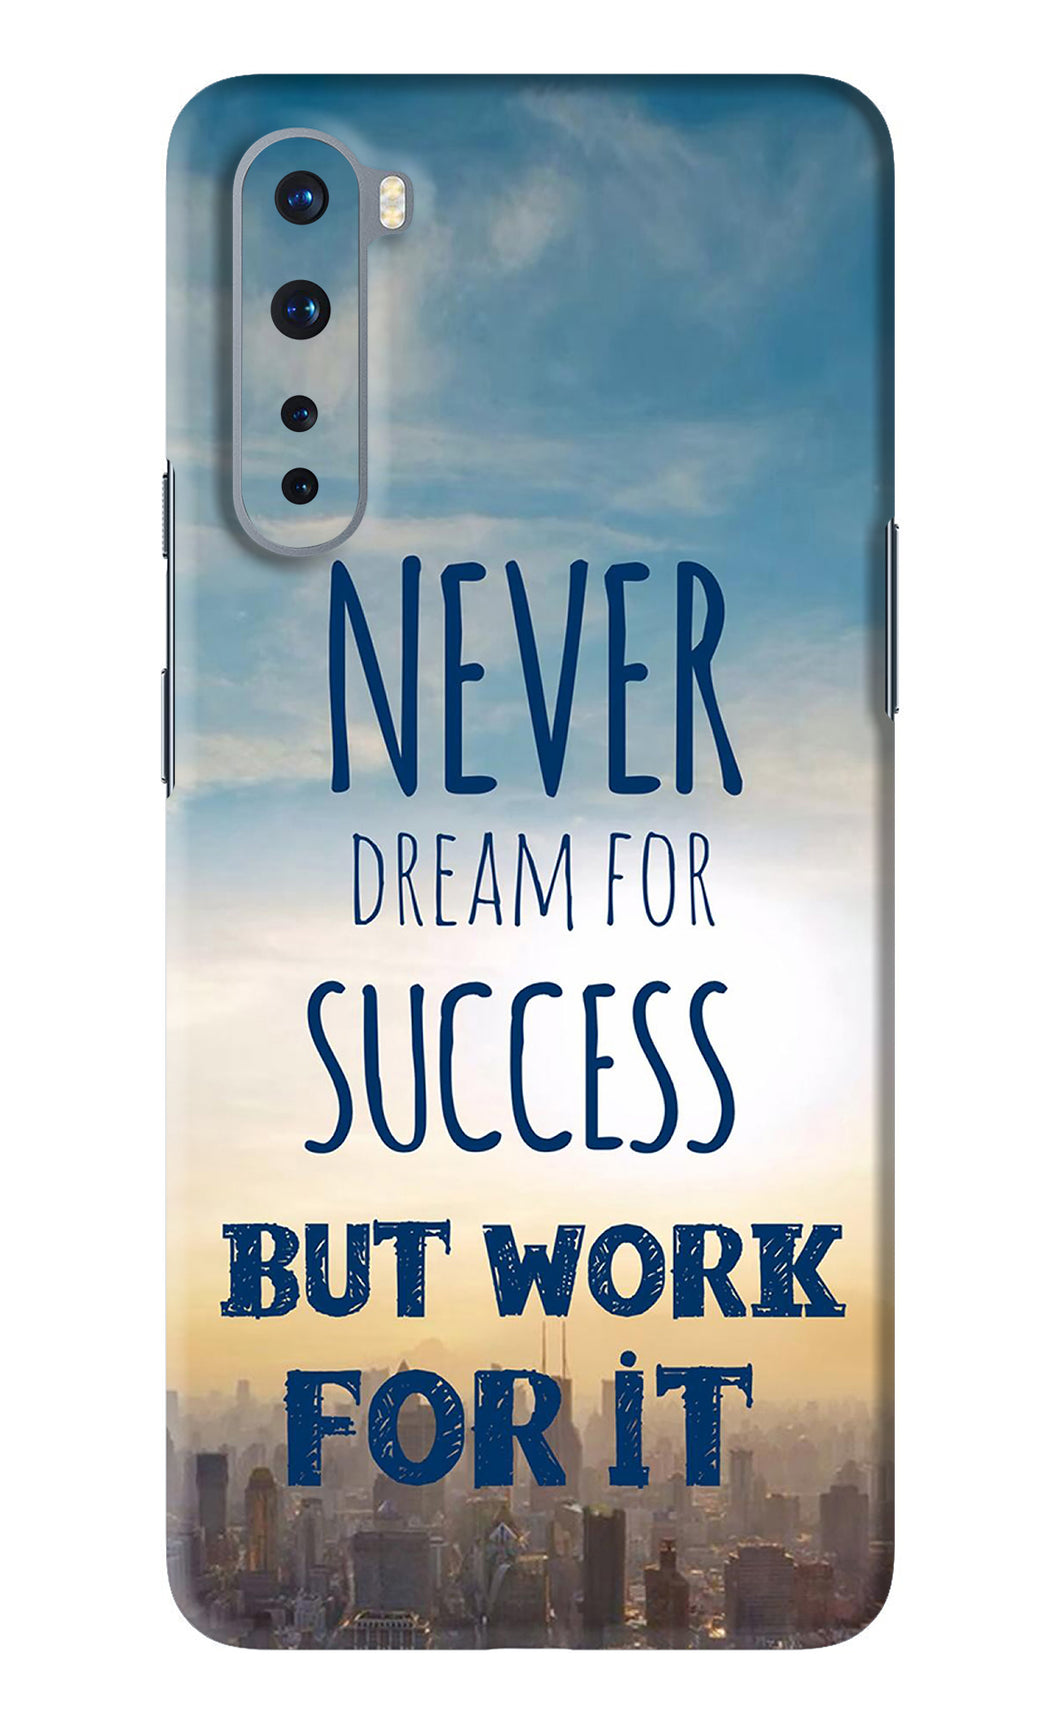 Never Dream For Success But Work For It OnePlus Nord Back Skin Wrap